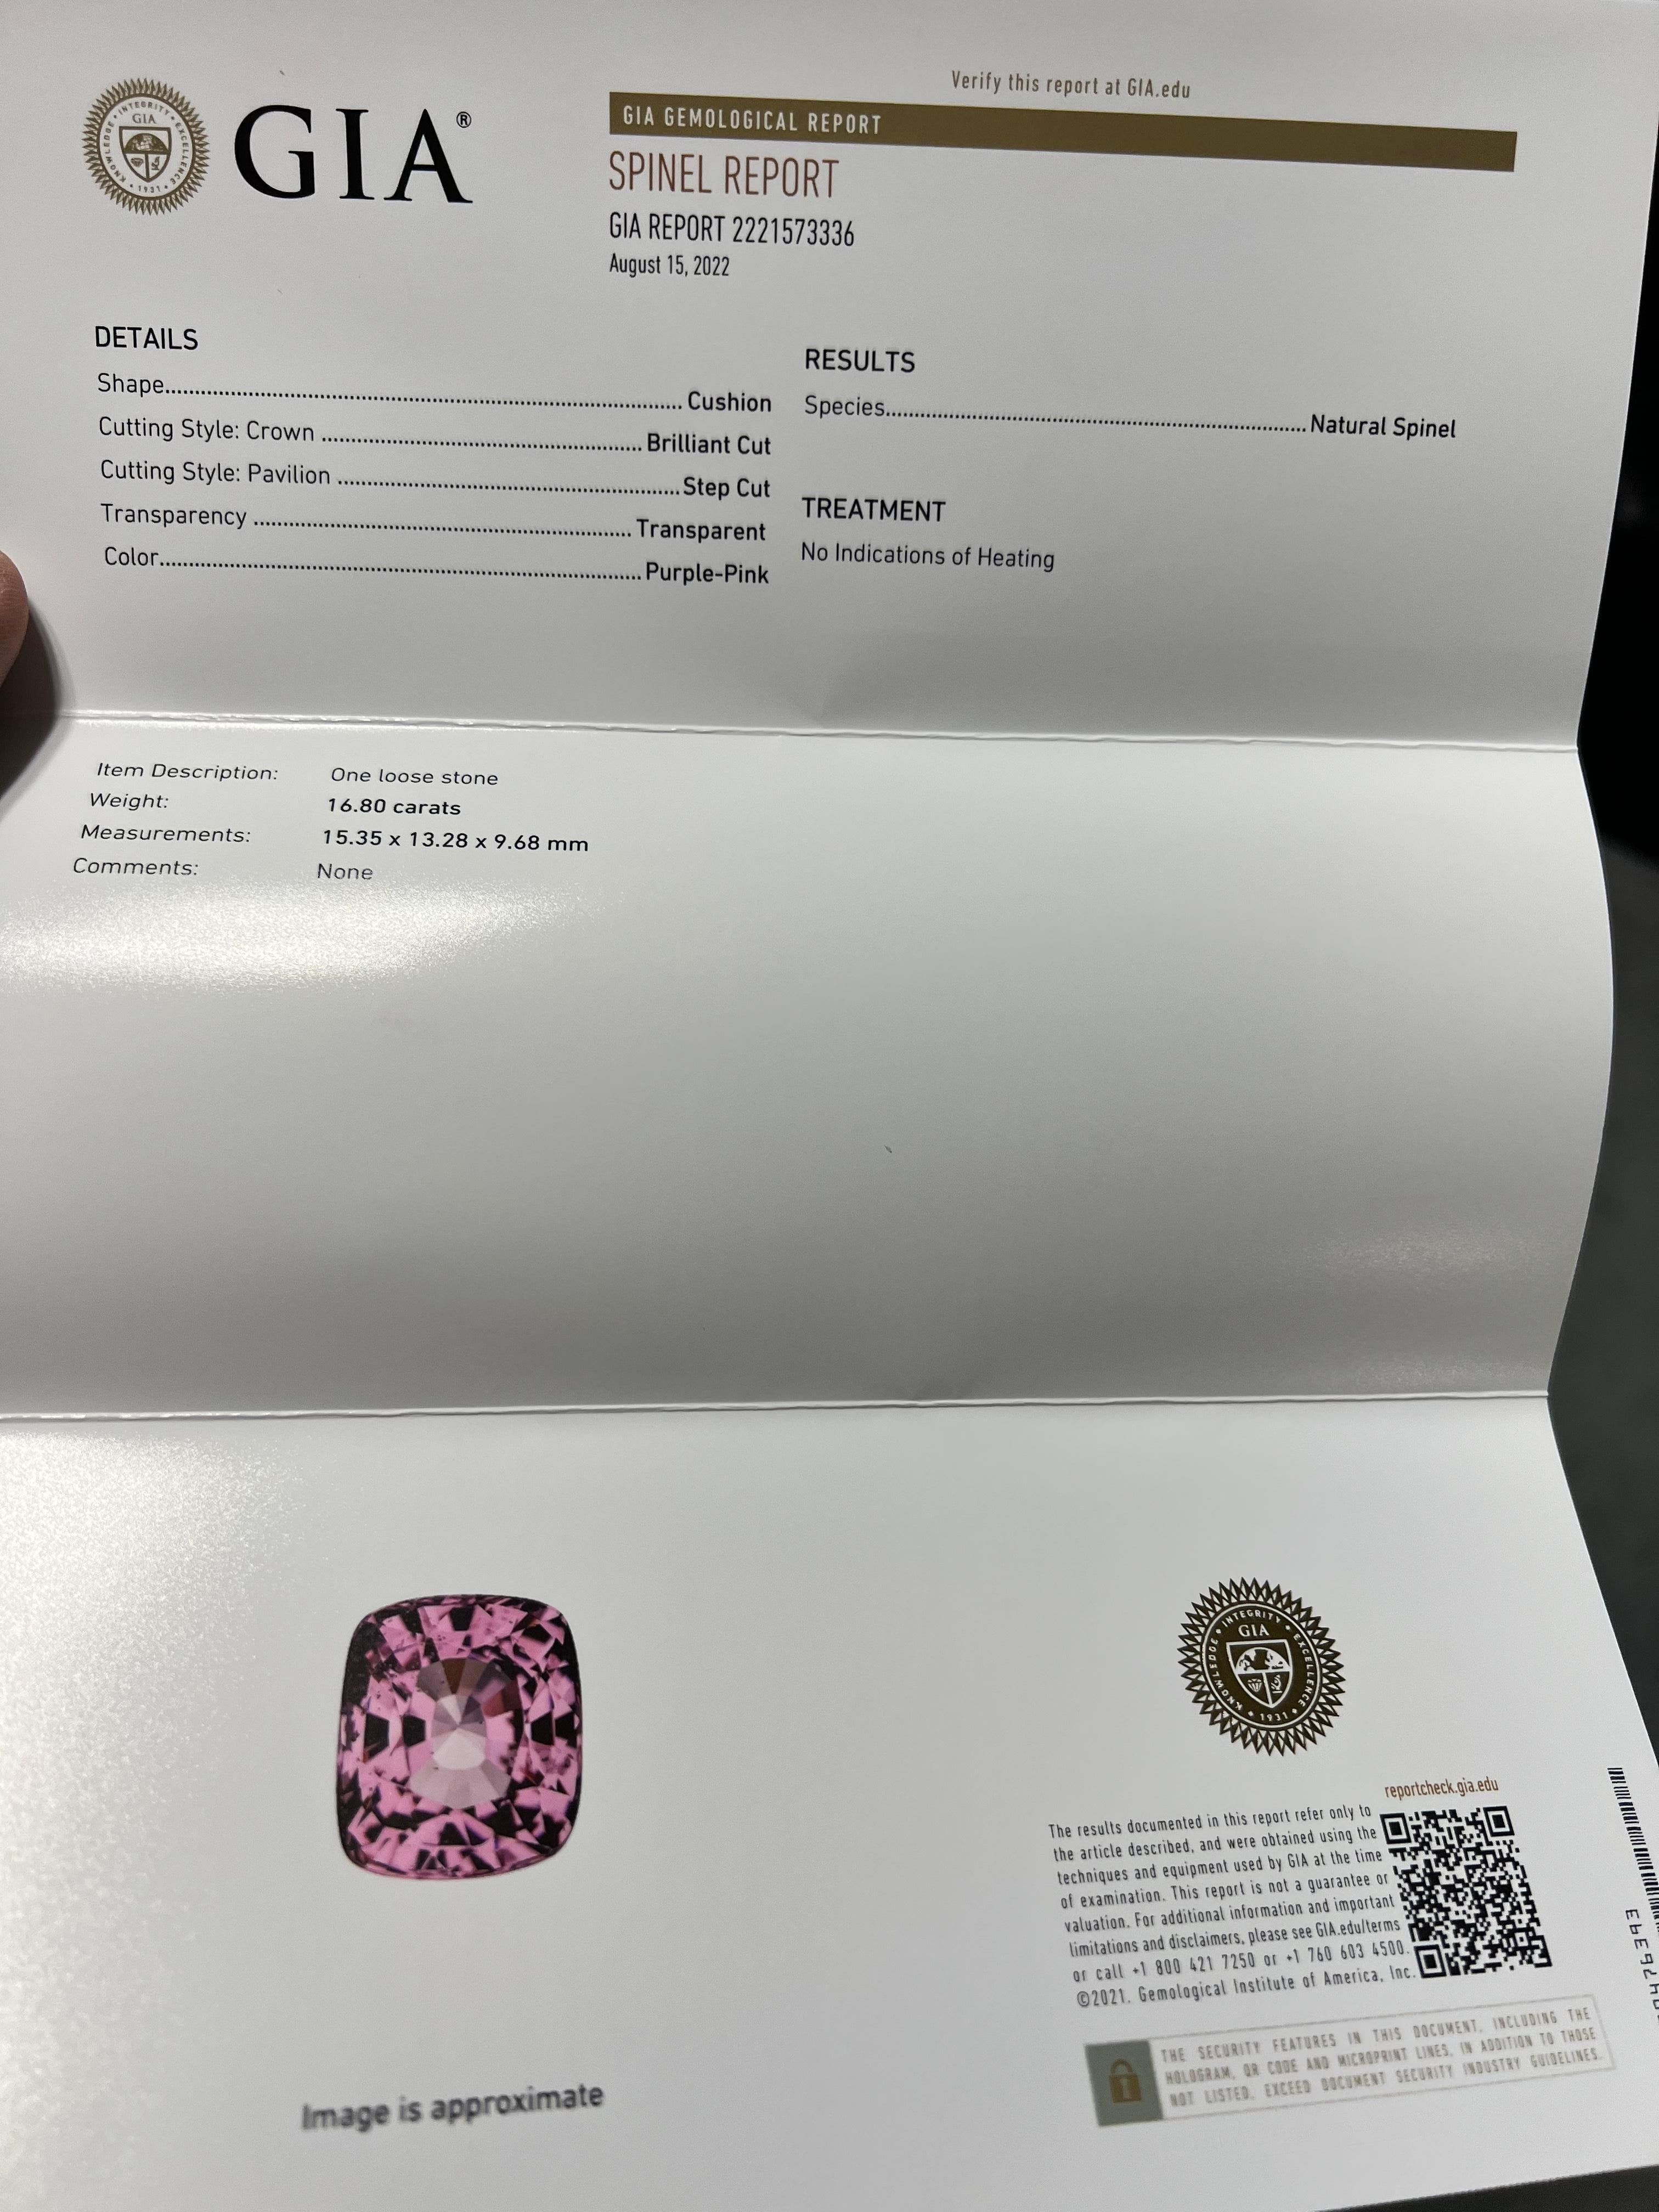 Originally $252,000 
I present to you “The Pink Rose Spinel “ This very rare 16.8 Carat Neon Purplish Pink Spinel gemstone is ready to be set in a pendant or cocktail ring. It’s a one of a kind jewel that I’ve never seen cut before . Look at the